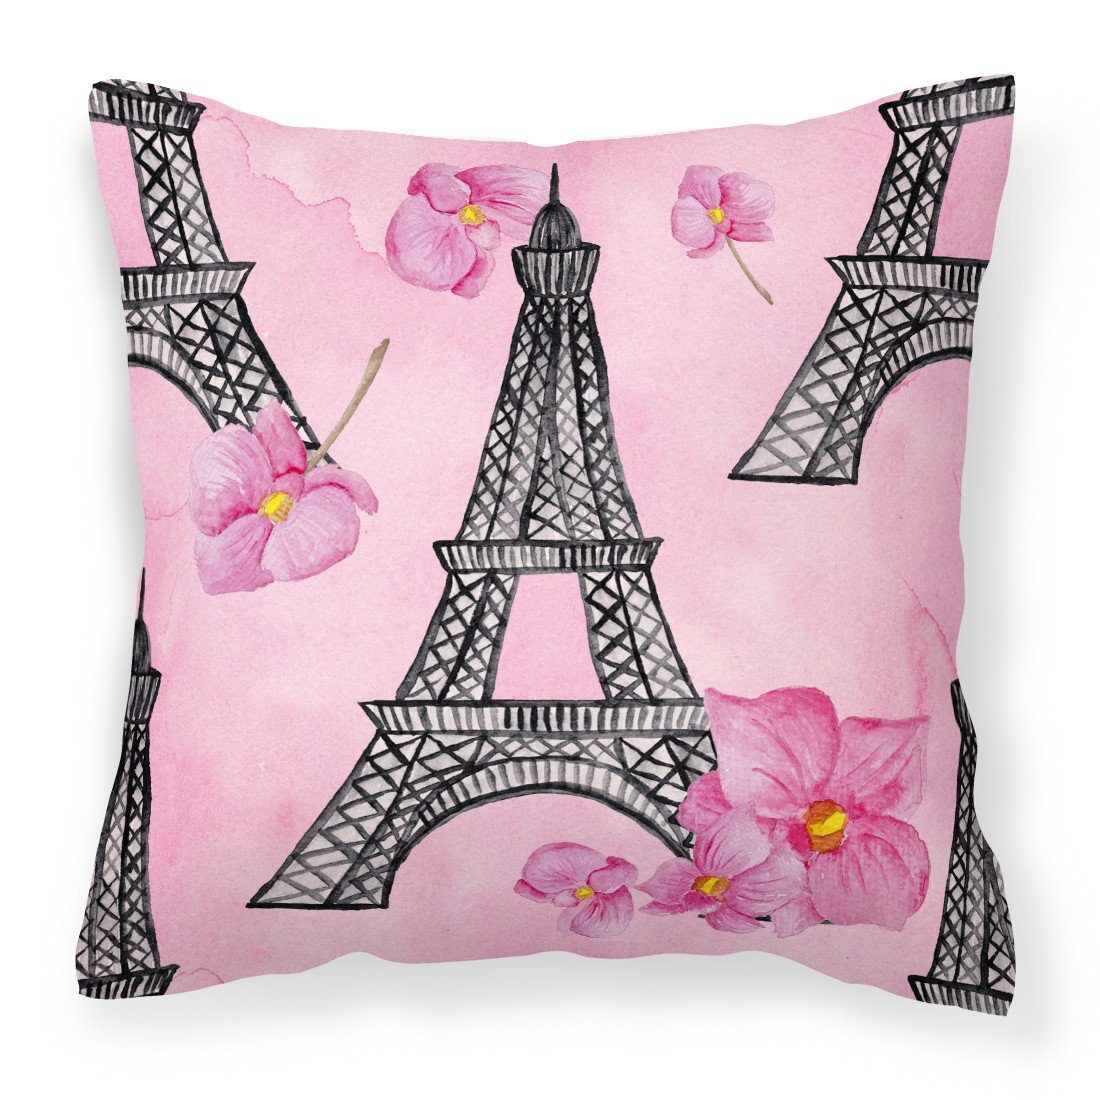 Watercolor Pink Flowers and Eiffel Tower Fabric Decorative Pillow BB7511PW1818 by Caroline's Treasures